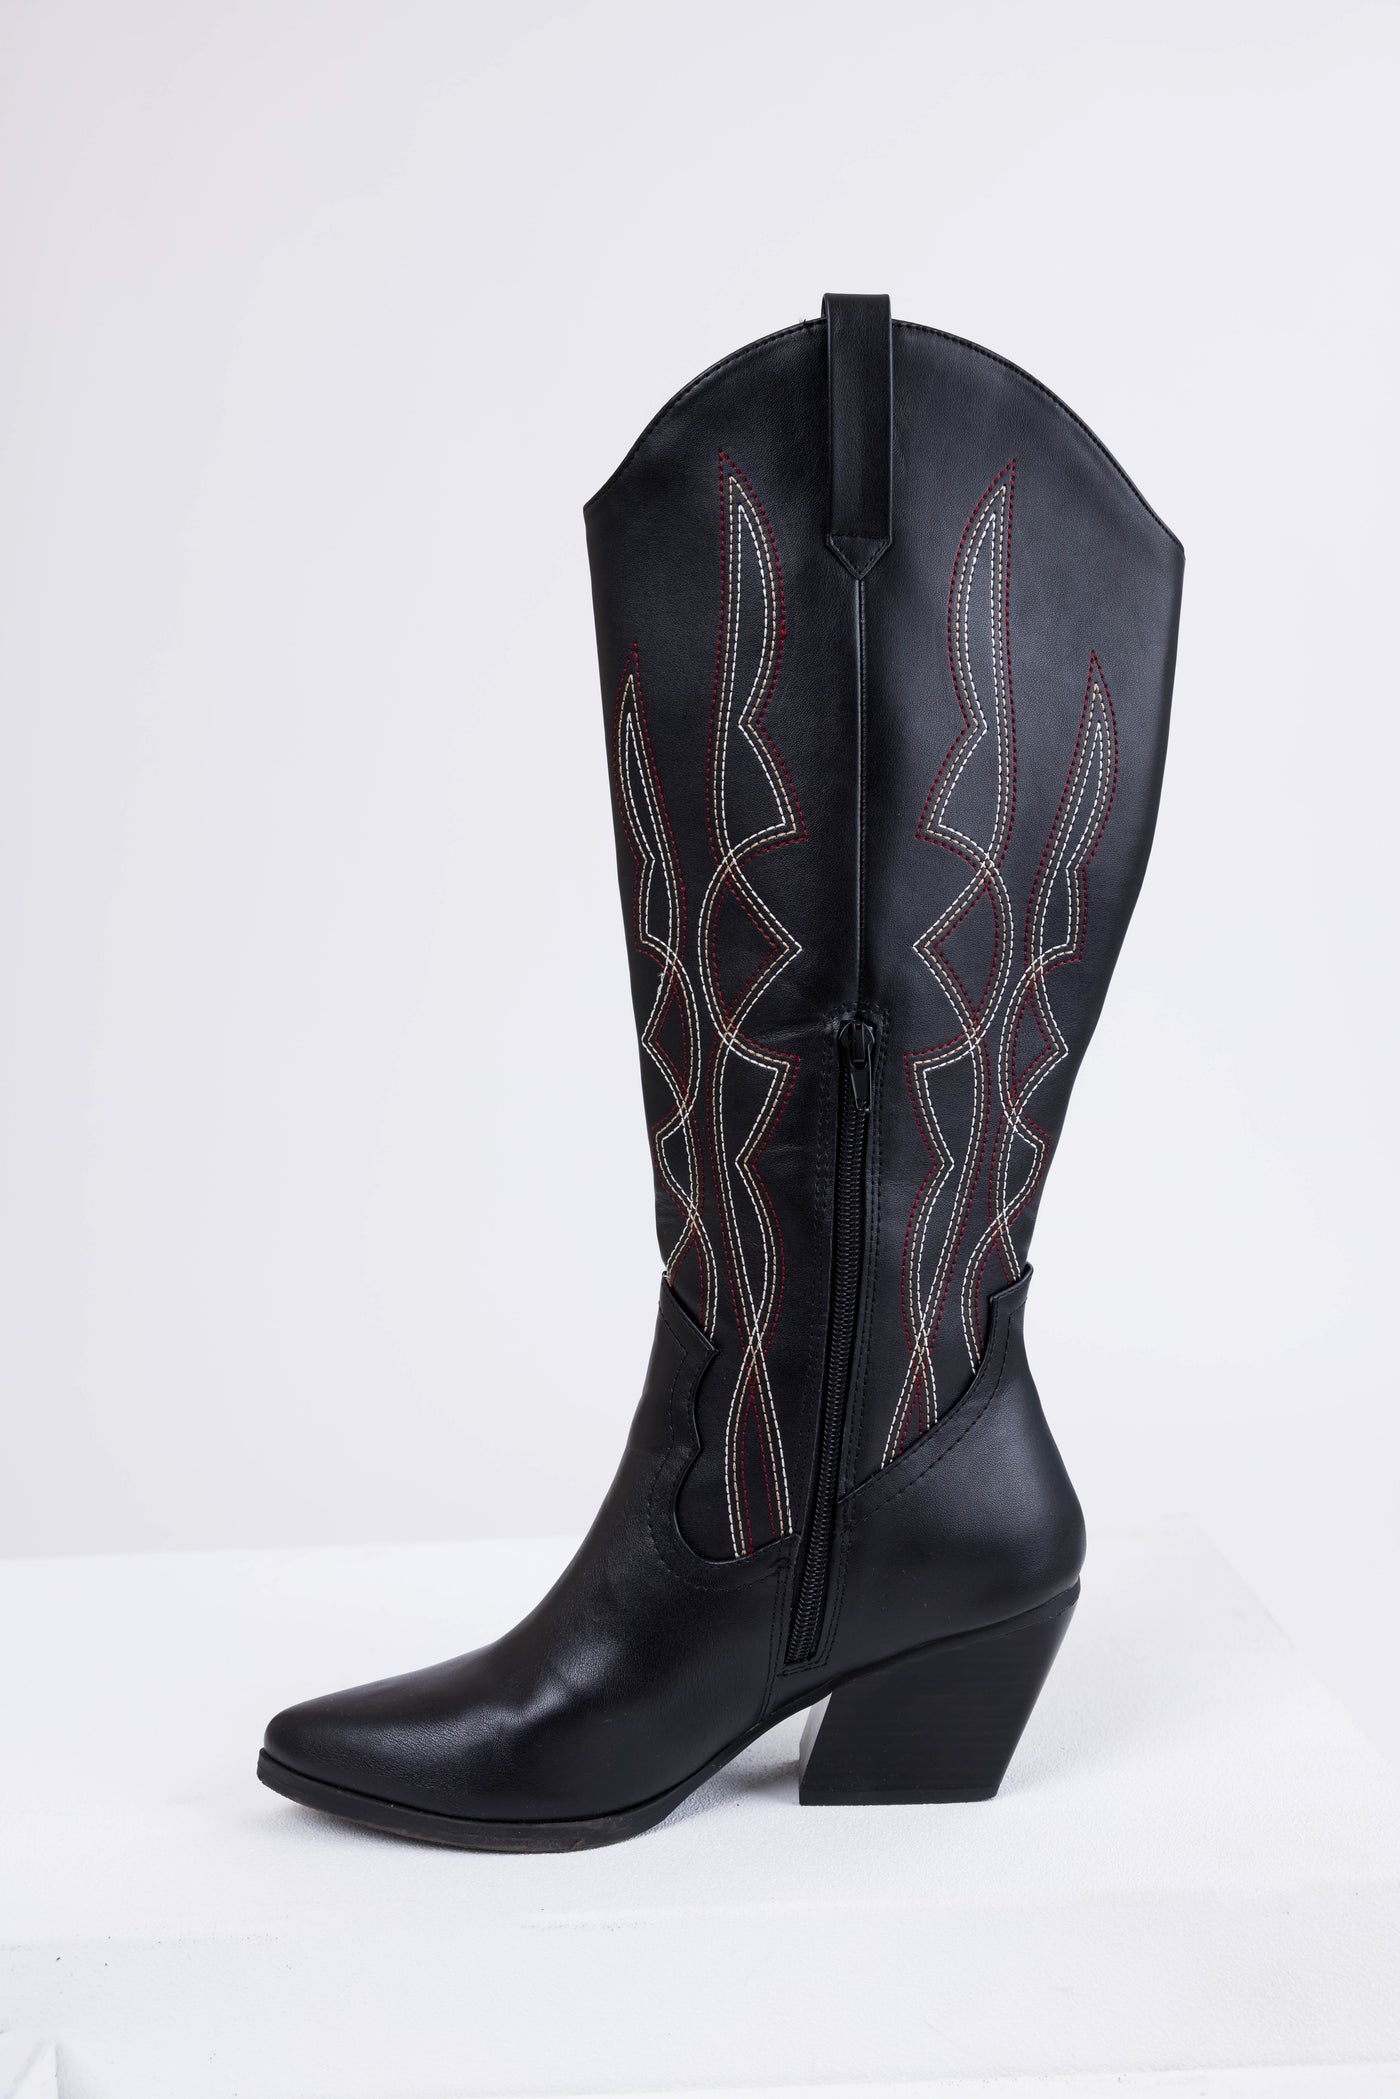 Black Western Style Knee High Boots